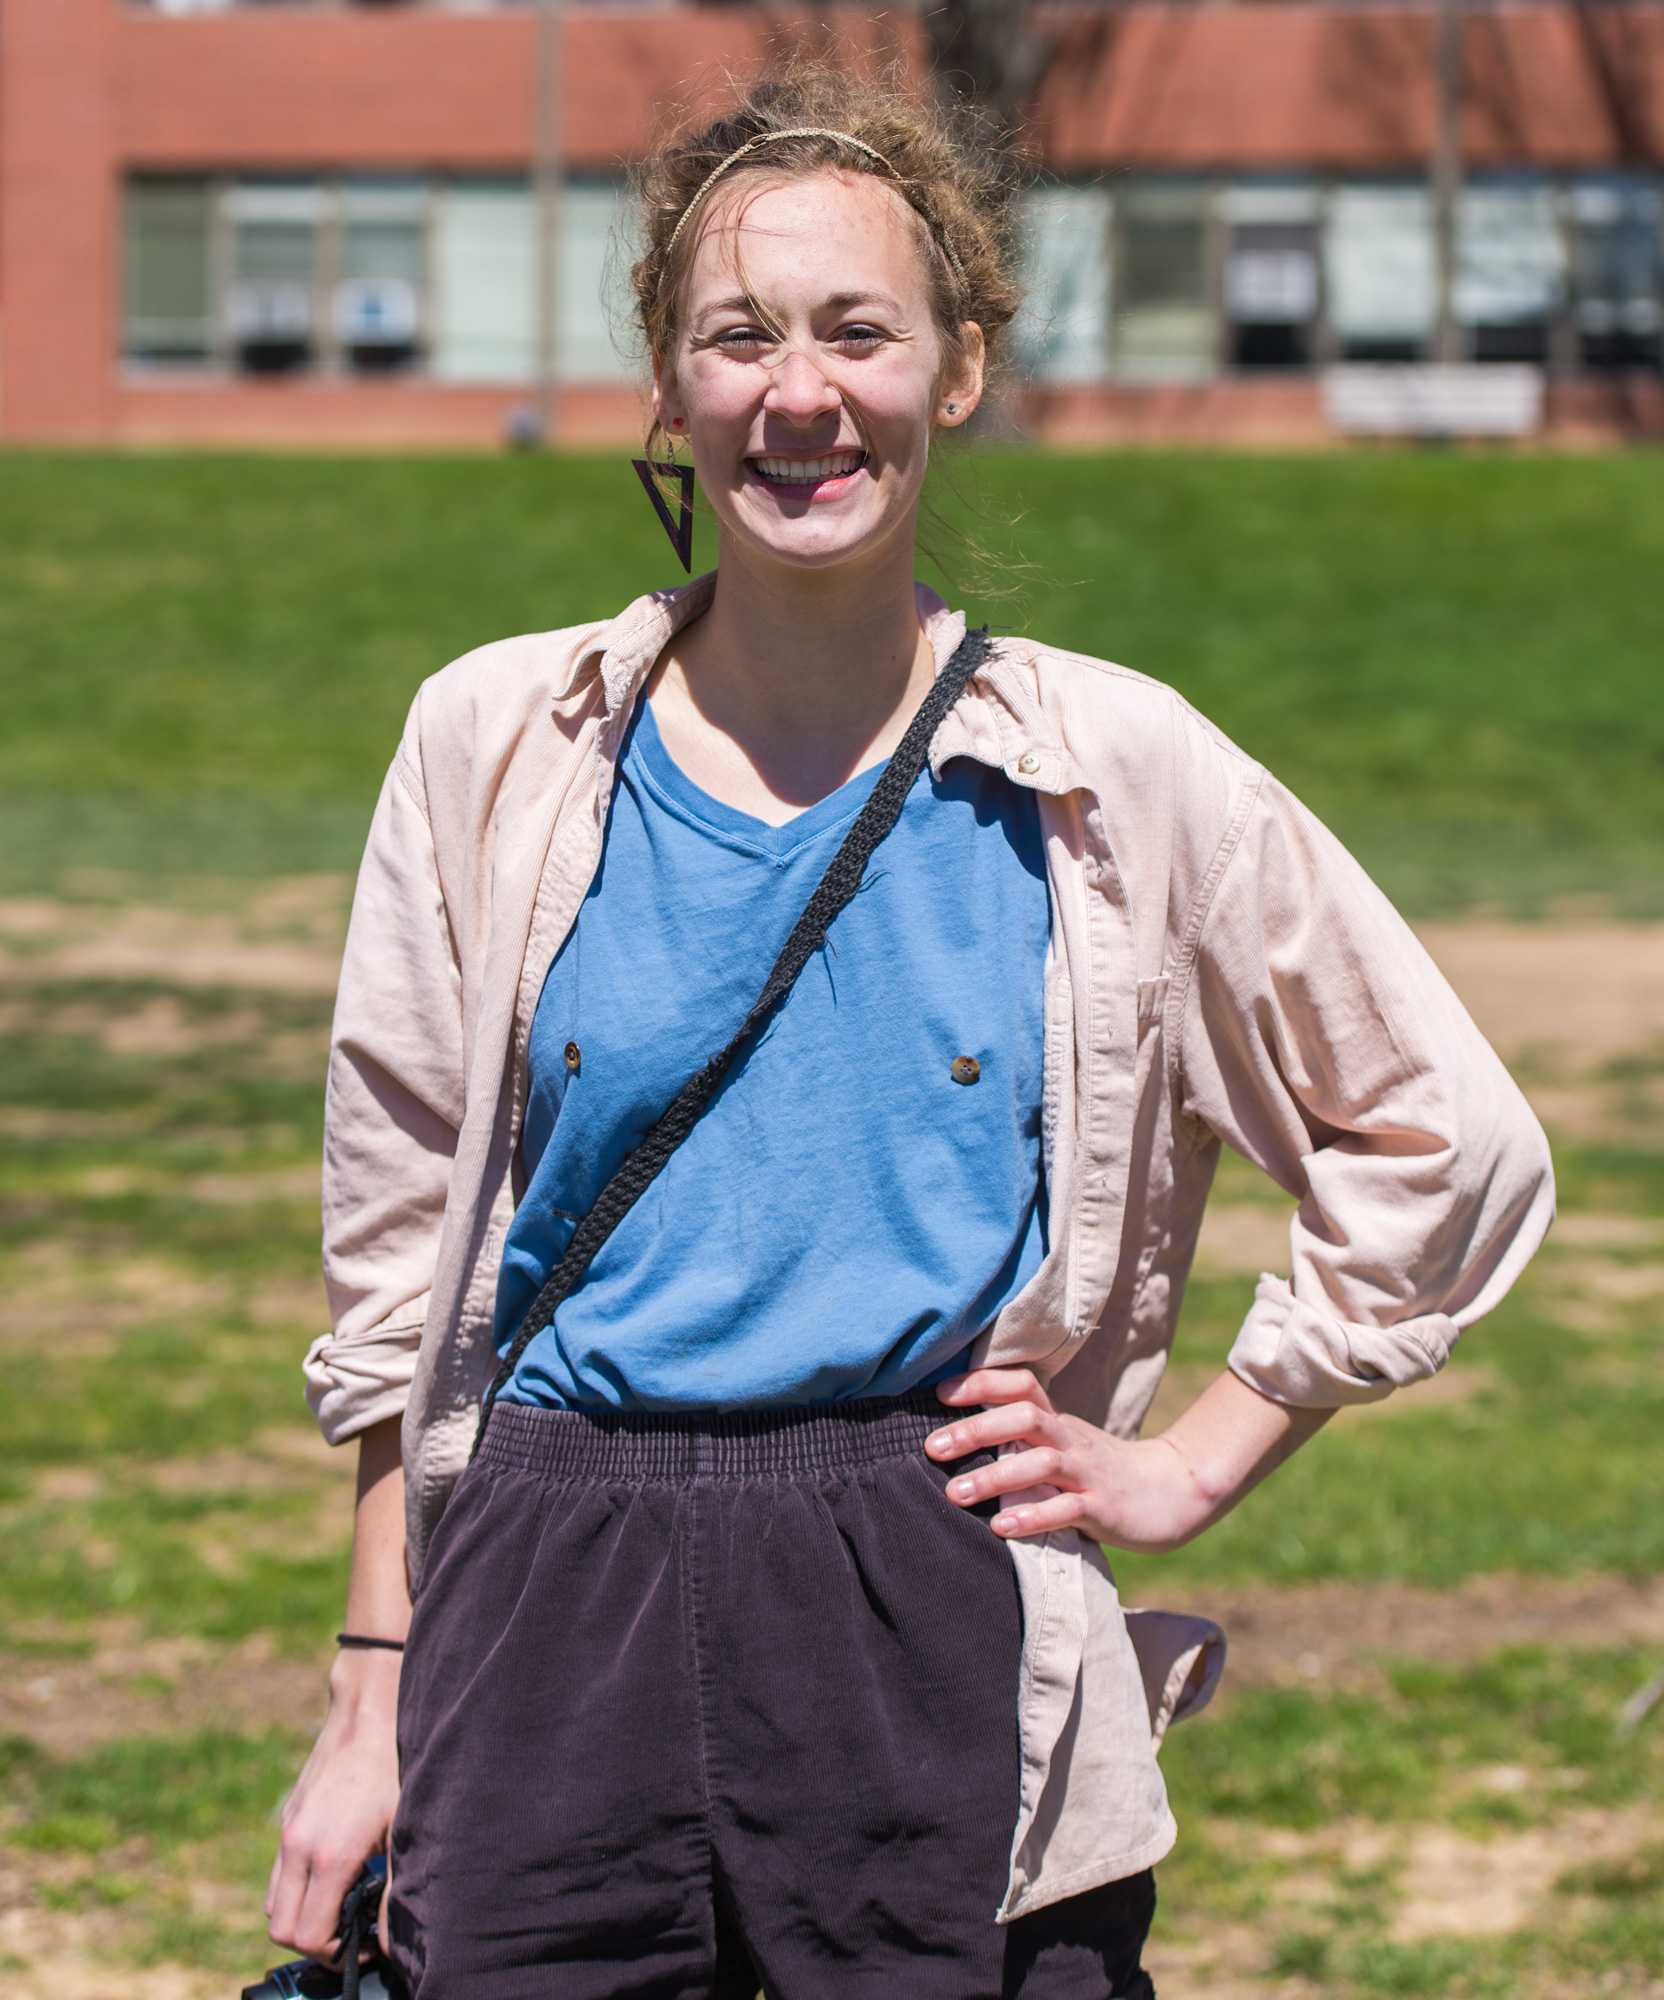 Freshman sustainable development major Audrie Emma Bruce wears a "nipple shirt." Bruce is the coordinator of the event. Photo by Dallas Linger.